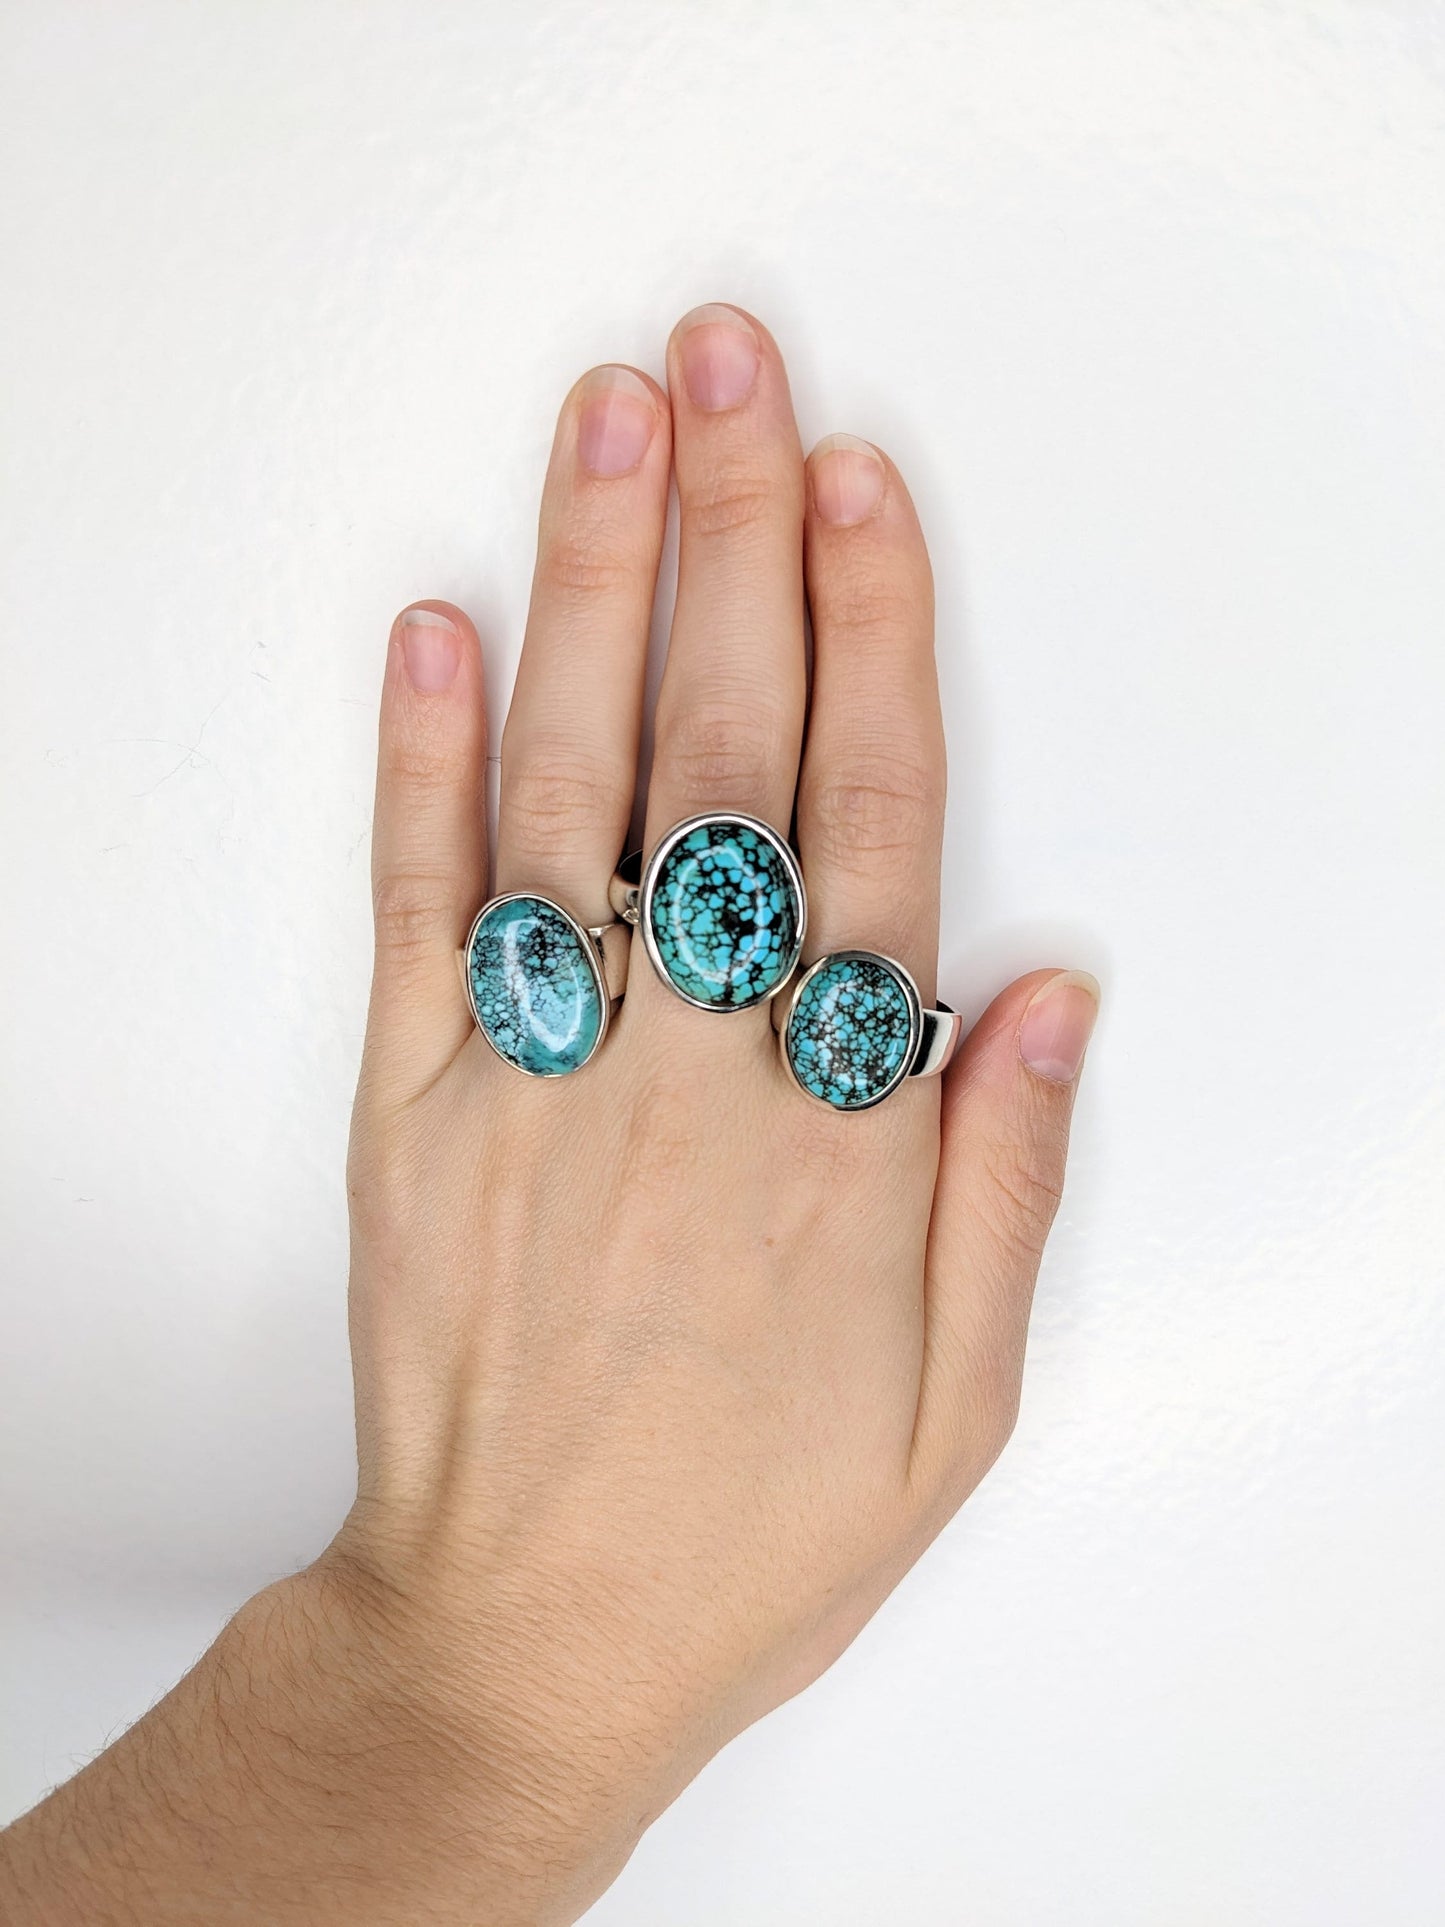 Spiderweb Turquoise Sterling Silver Ring